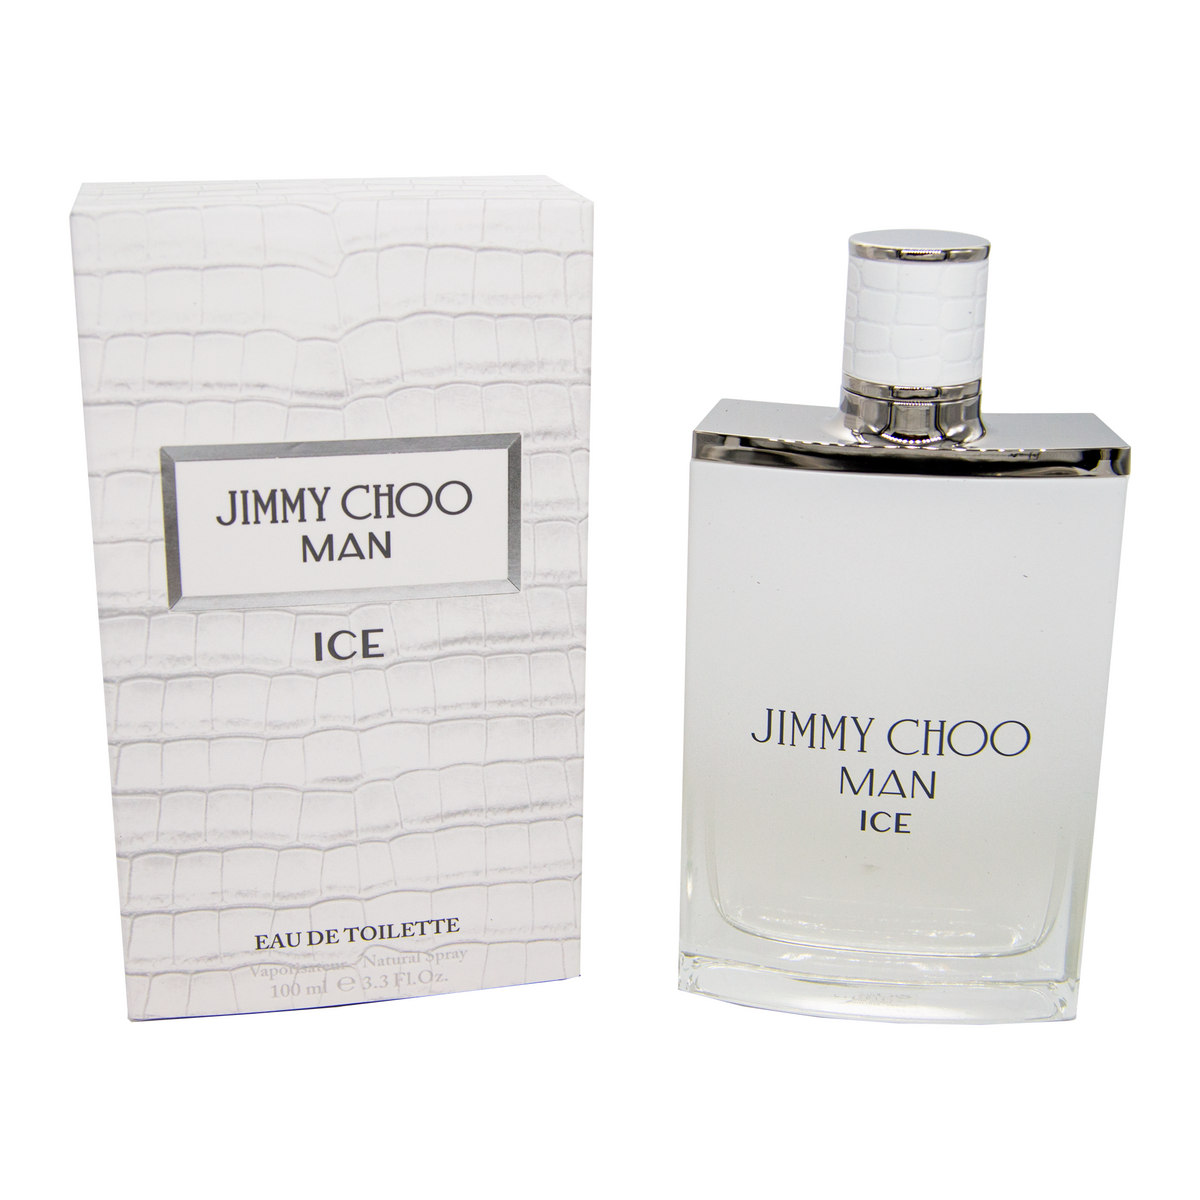 JImmy Choo for Men - Ice EdT - The Scent Masters